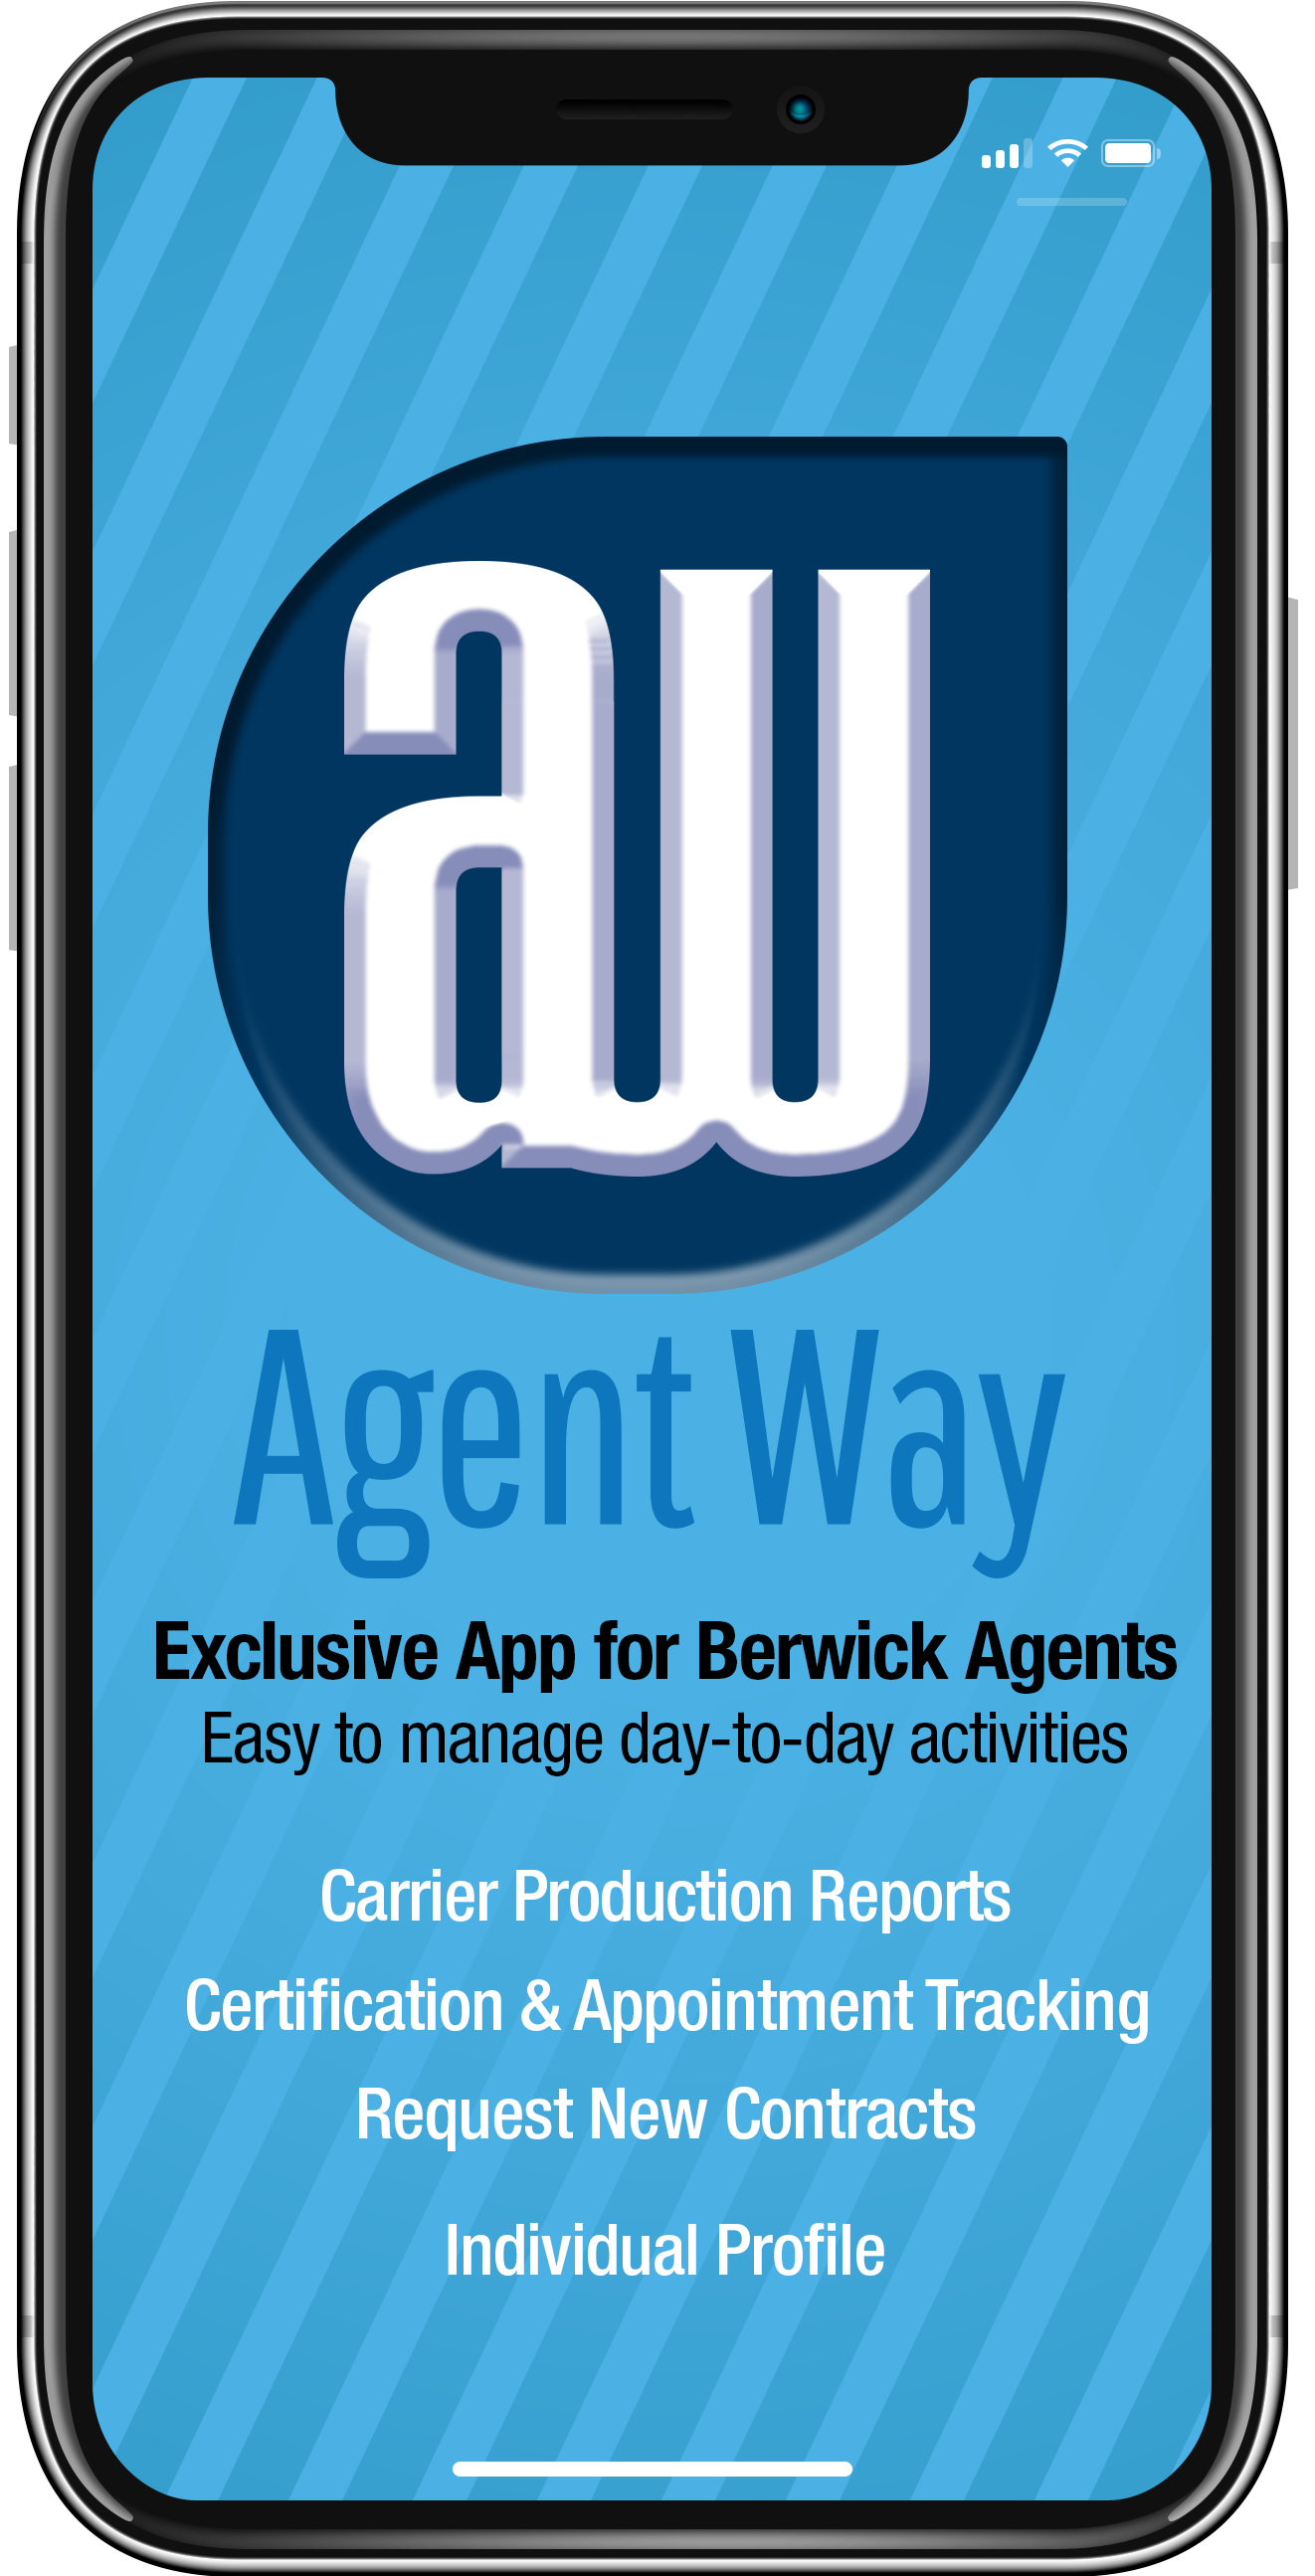 AgentWay on a phone